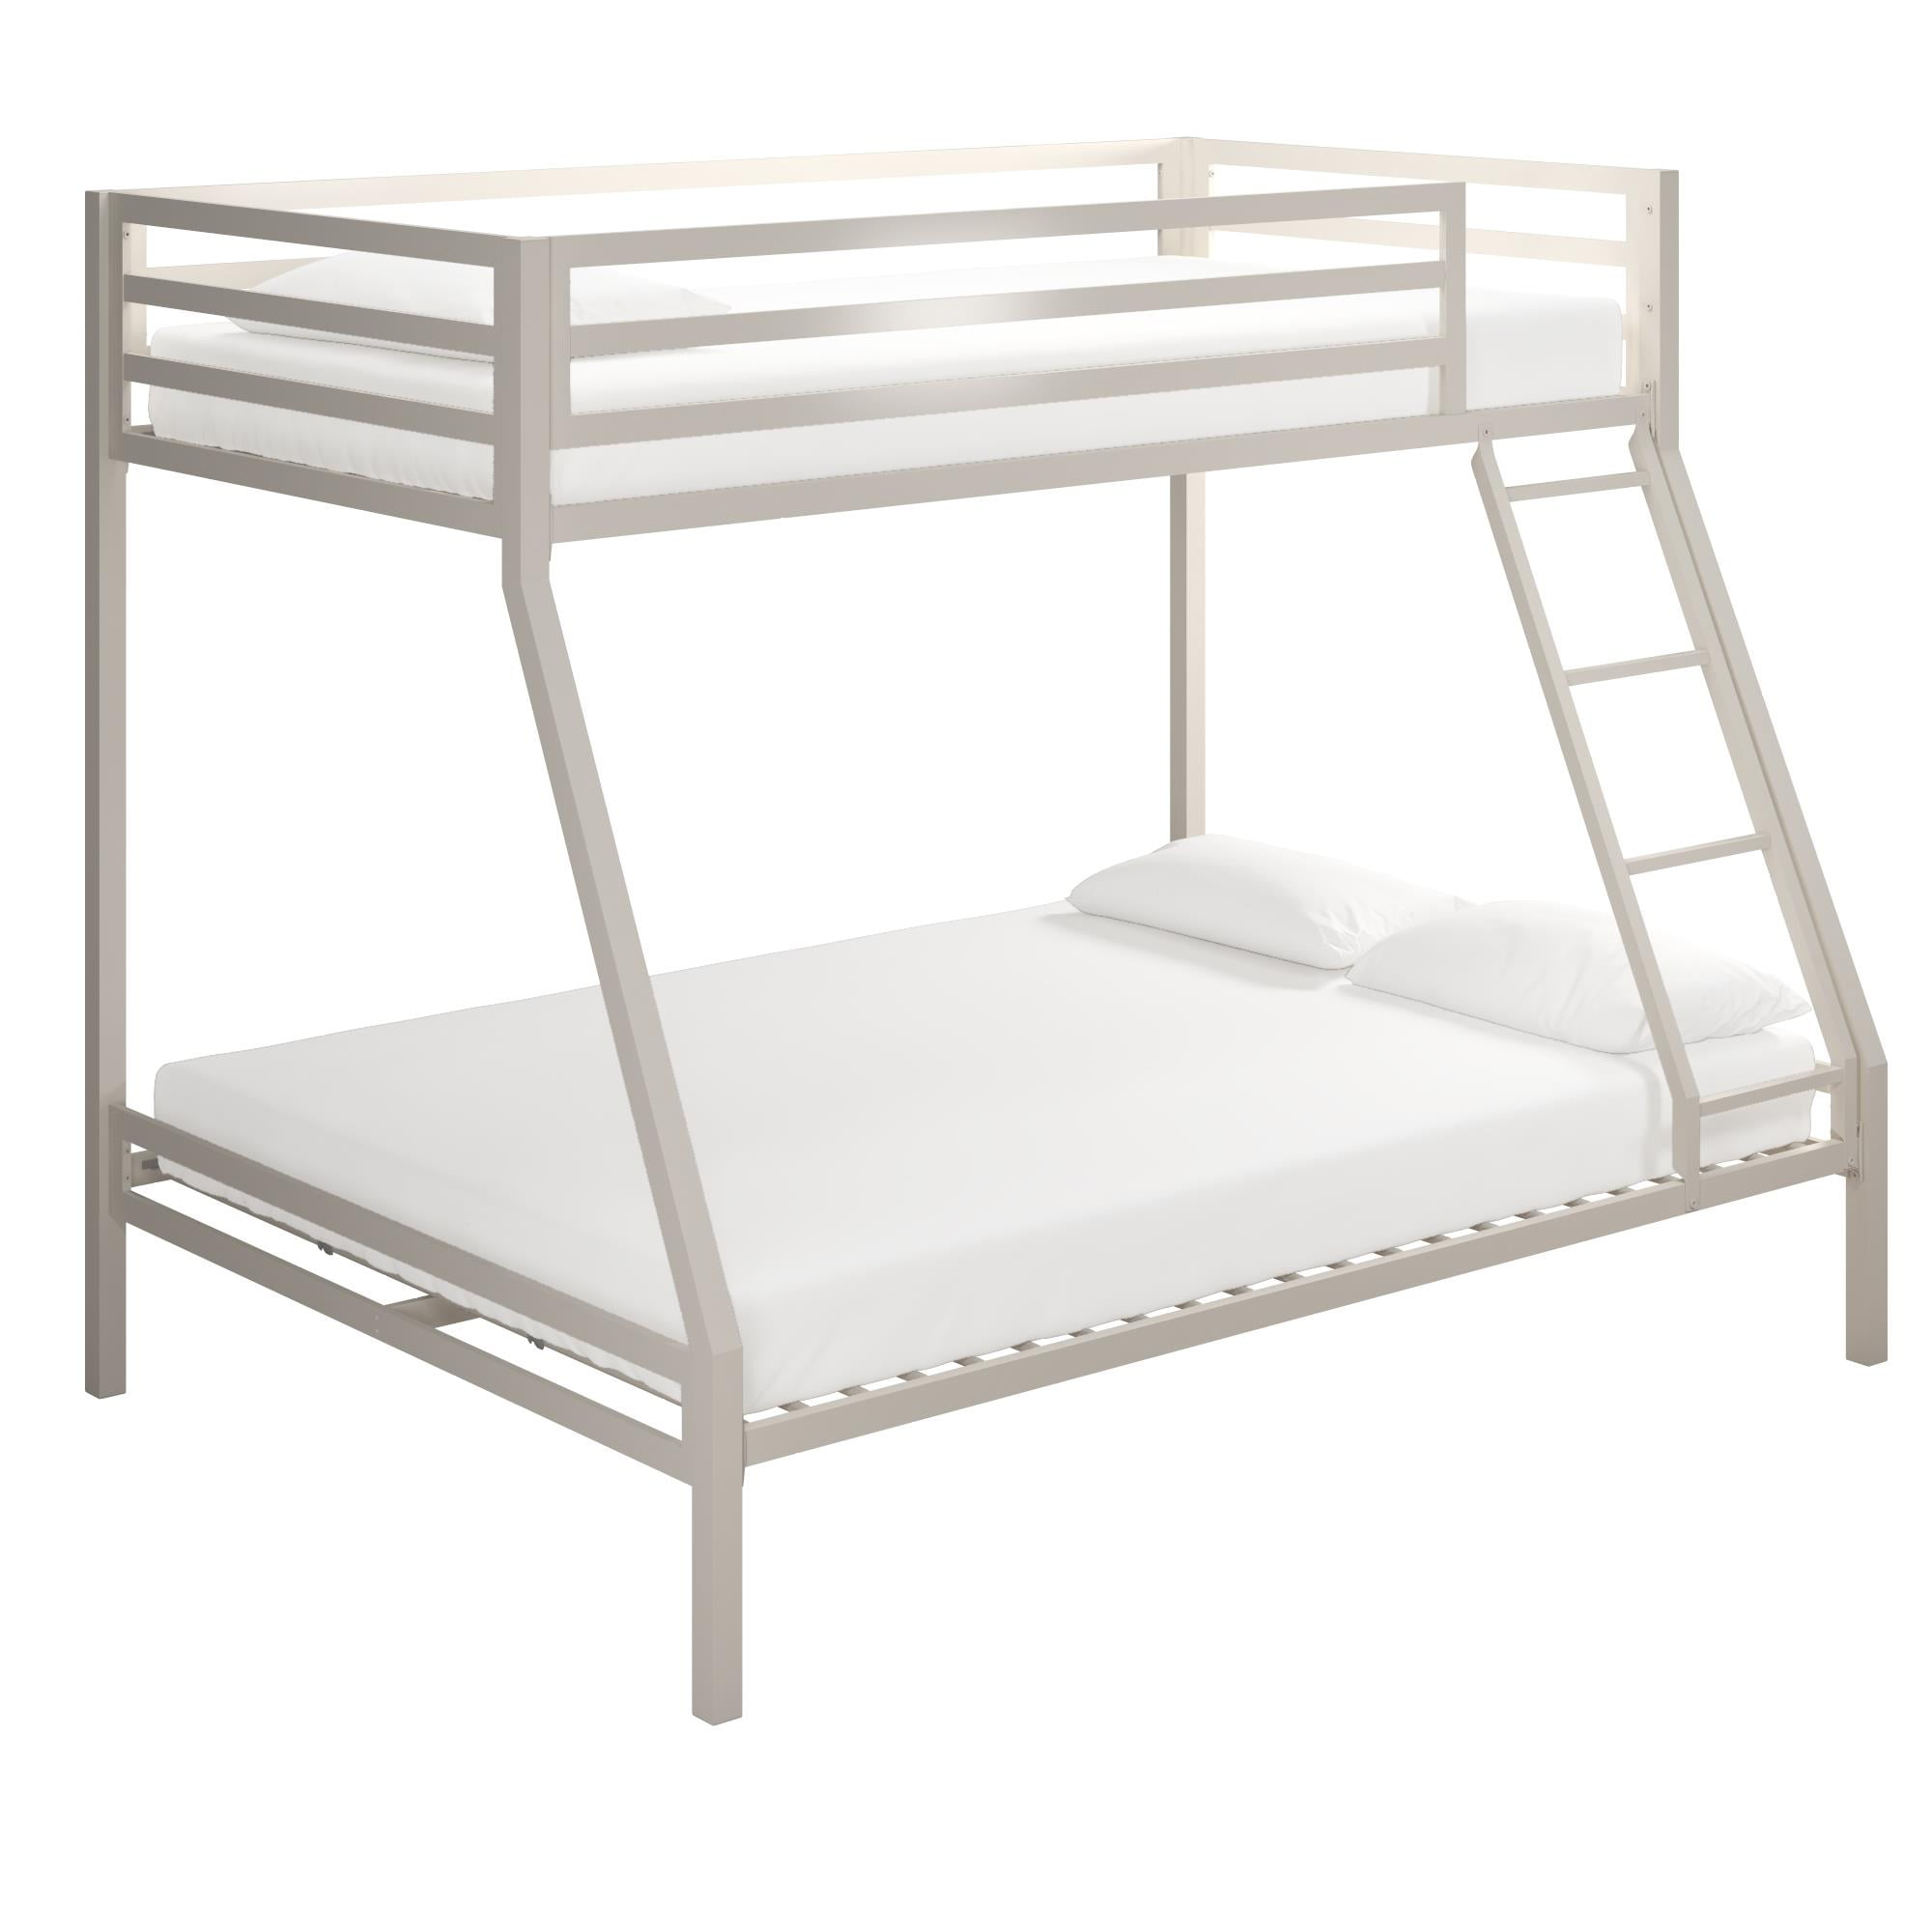 Mainstays Premium Twin Over Full Bunk Bed, Mainstays Bunk Bed Twin Over Full Set